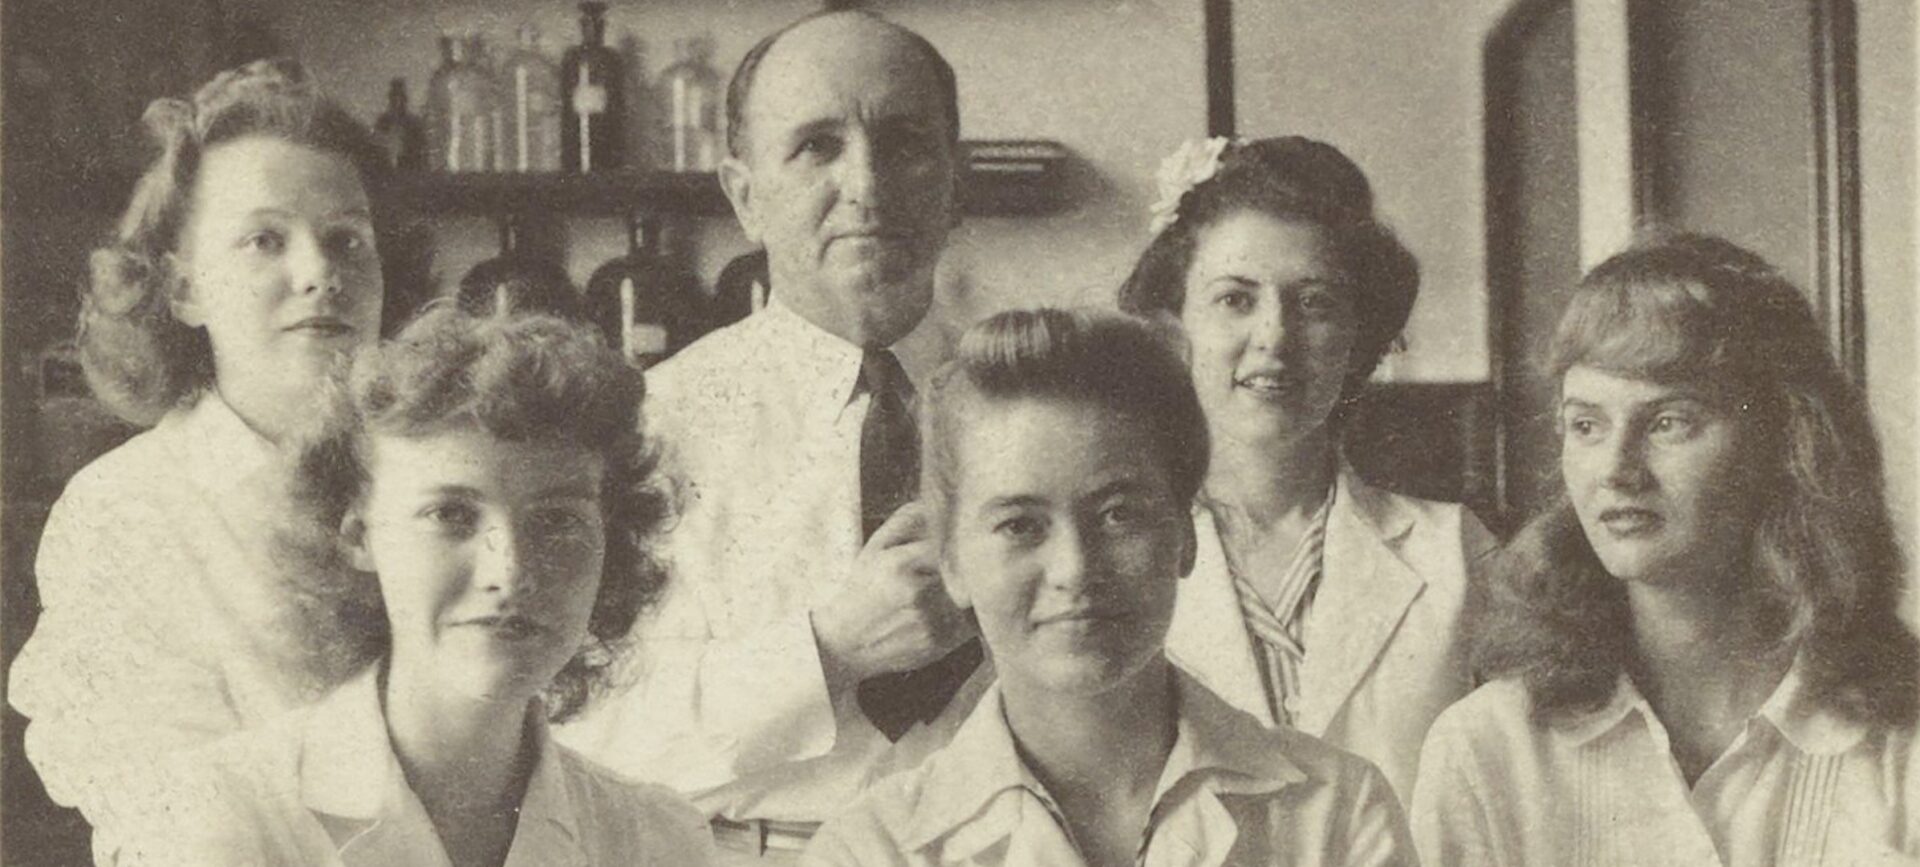 Michael Somogyi and Unidentified Women in Laboratory